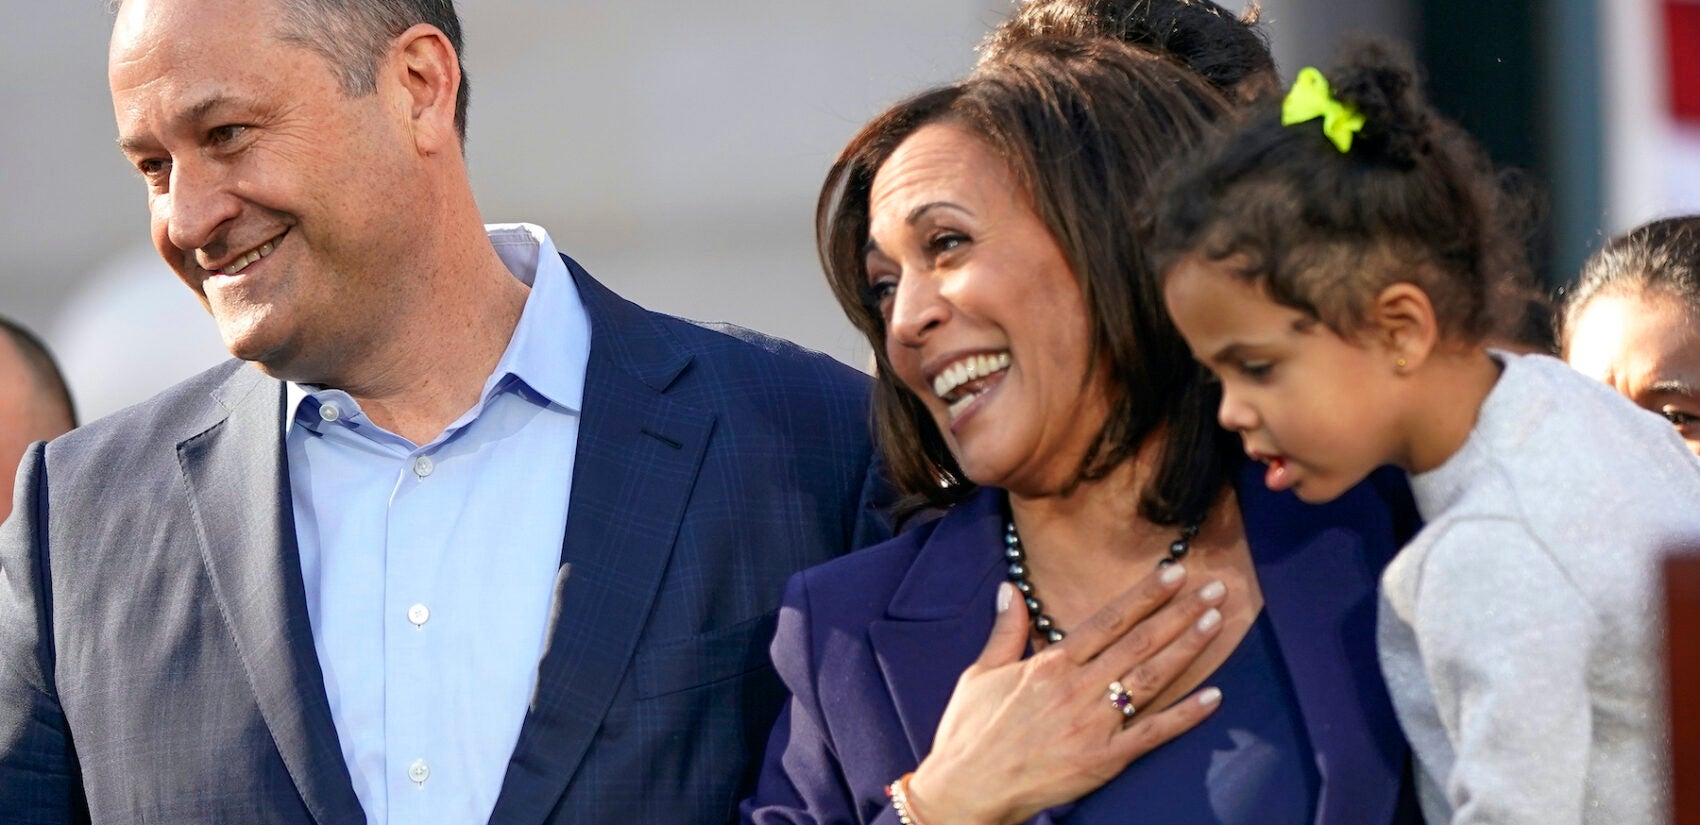 U.S. Sen. Kamala Harris, of D-California, holds her niece Amara Ajagu, right, next to her husband Douglas Emhoff, left, as she formally launch her presidential campaign at a rally in her hometown of Oakland, Calif., Sunday, Jan. 27, 2019. (AP Photo/Tony Avelar)